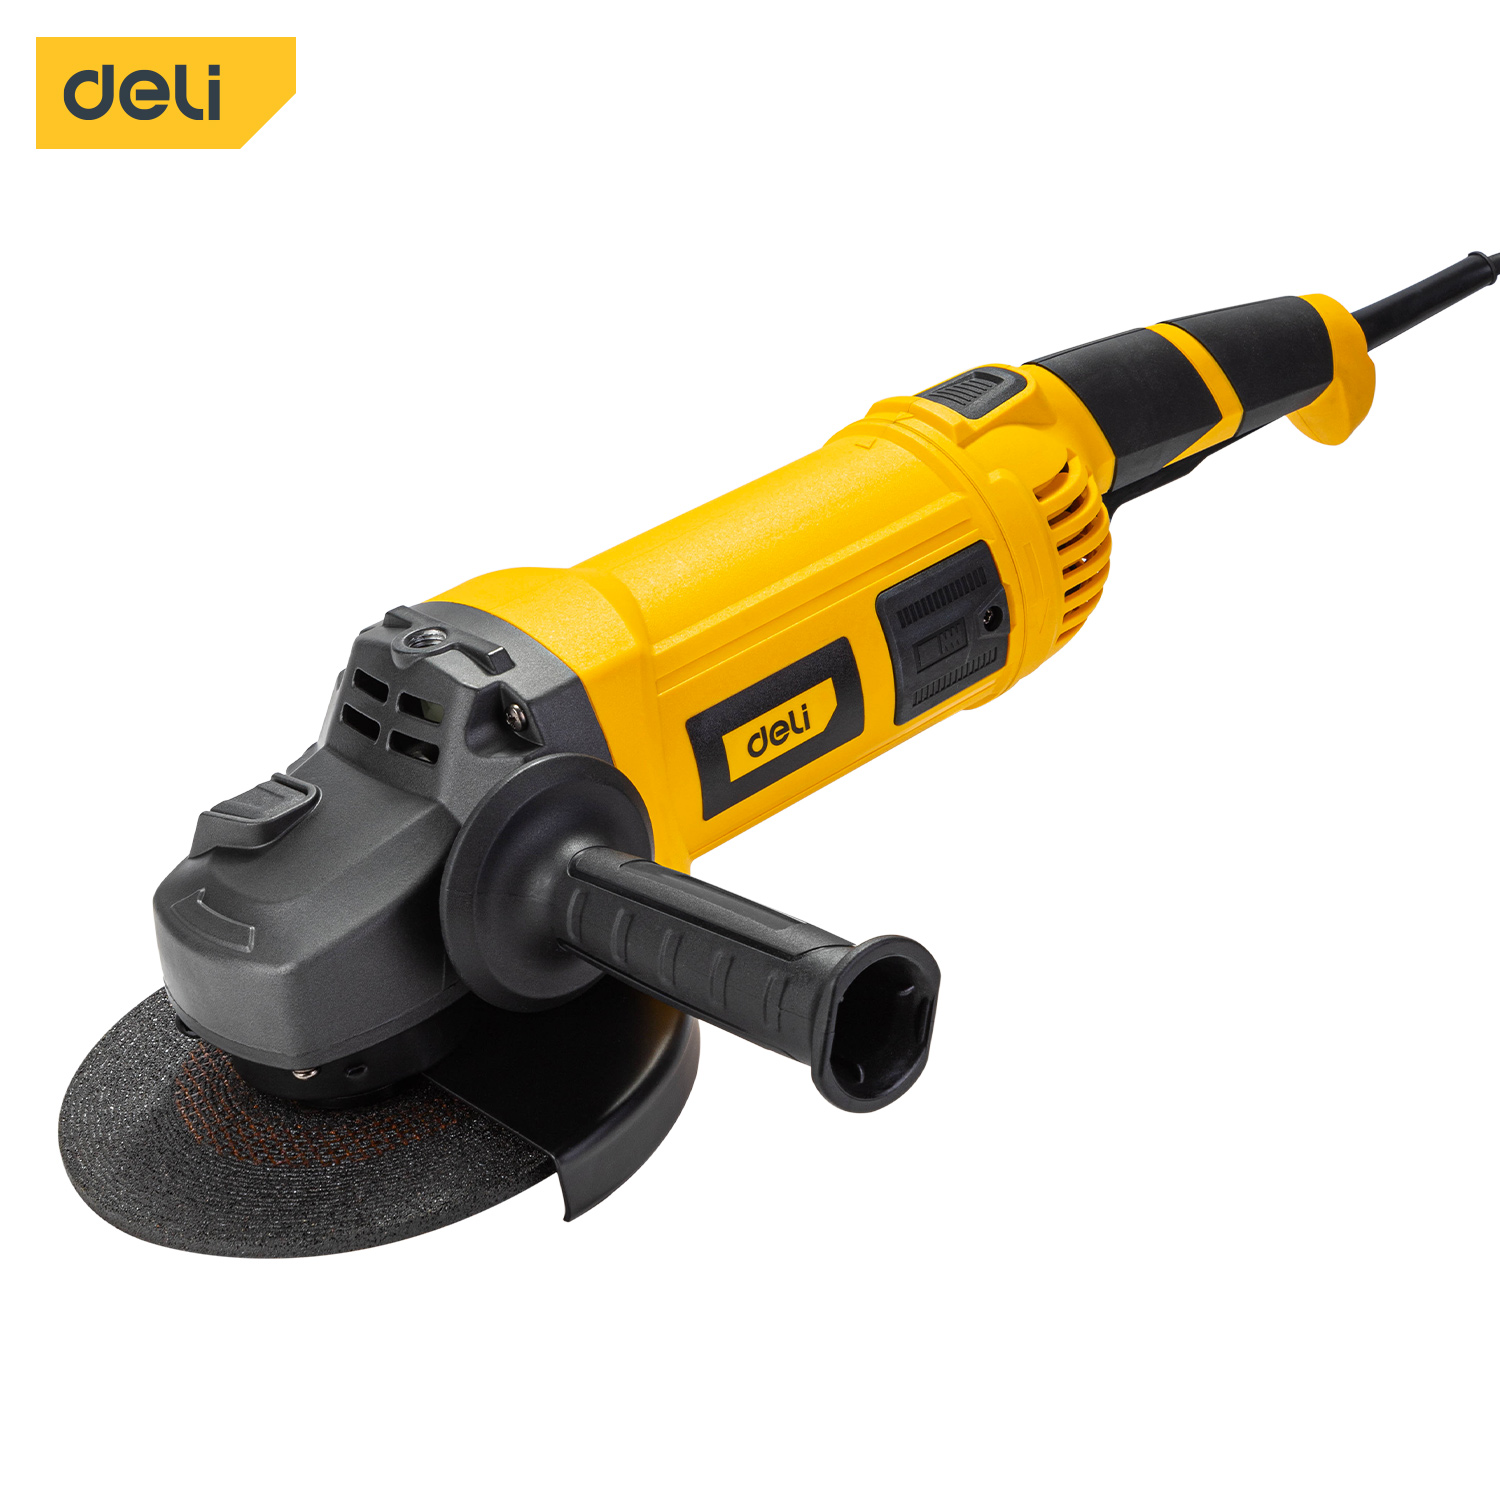 Multi-Purpose Handheld Angle Grinder For Cutting